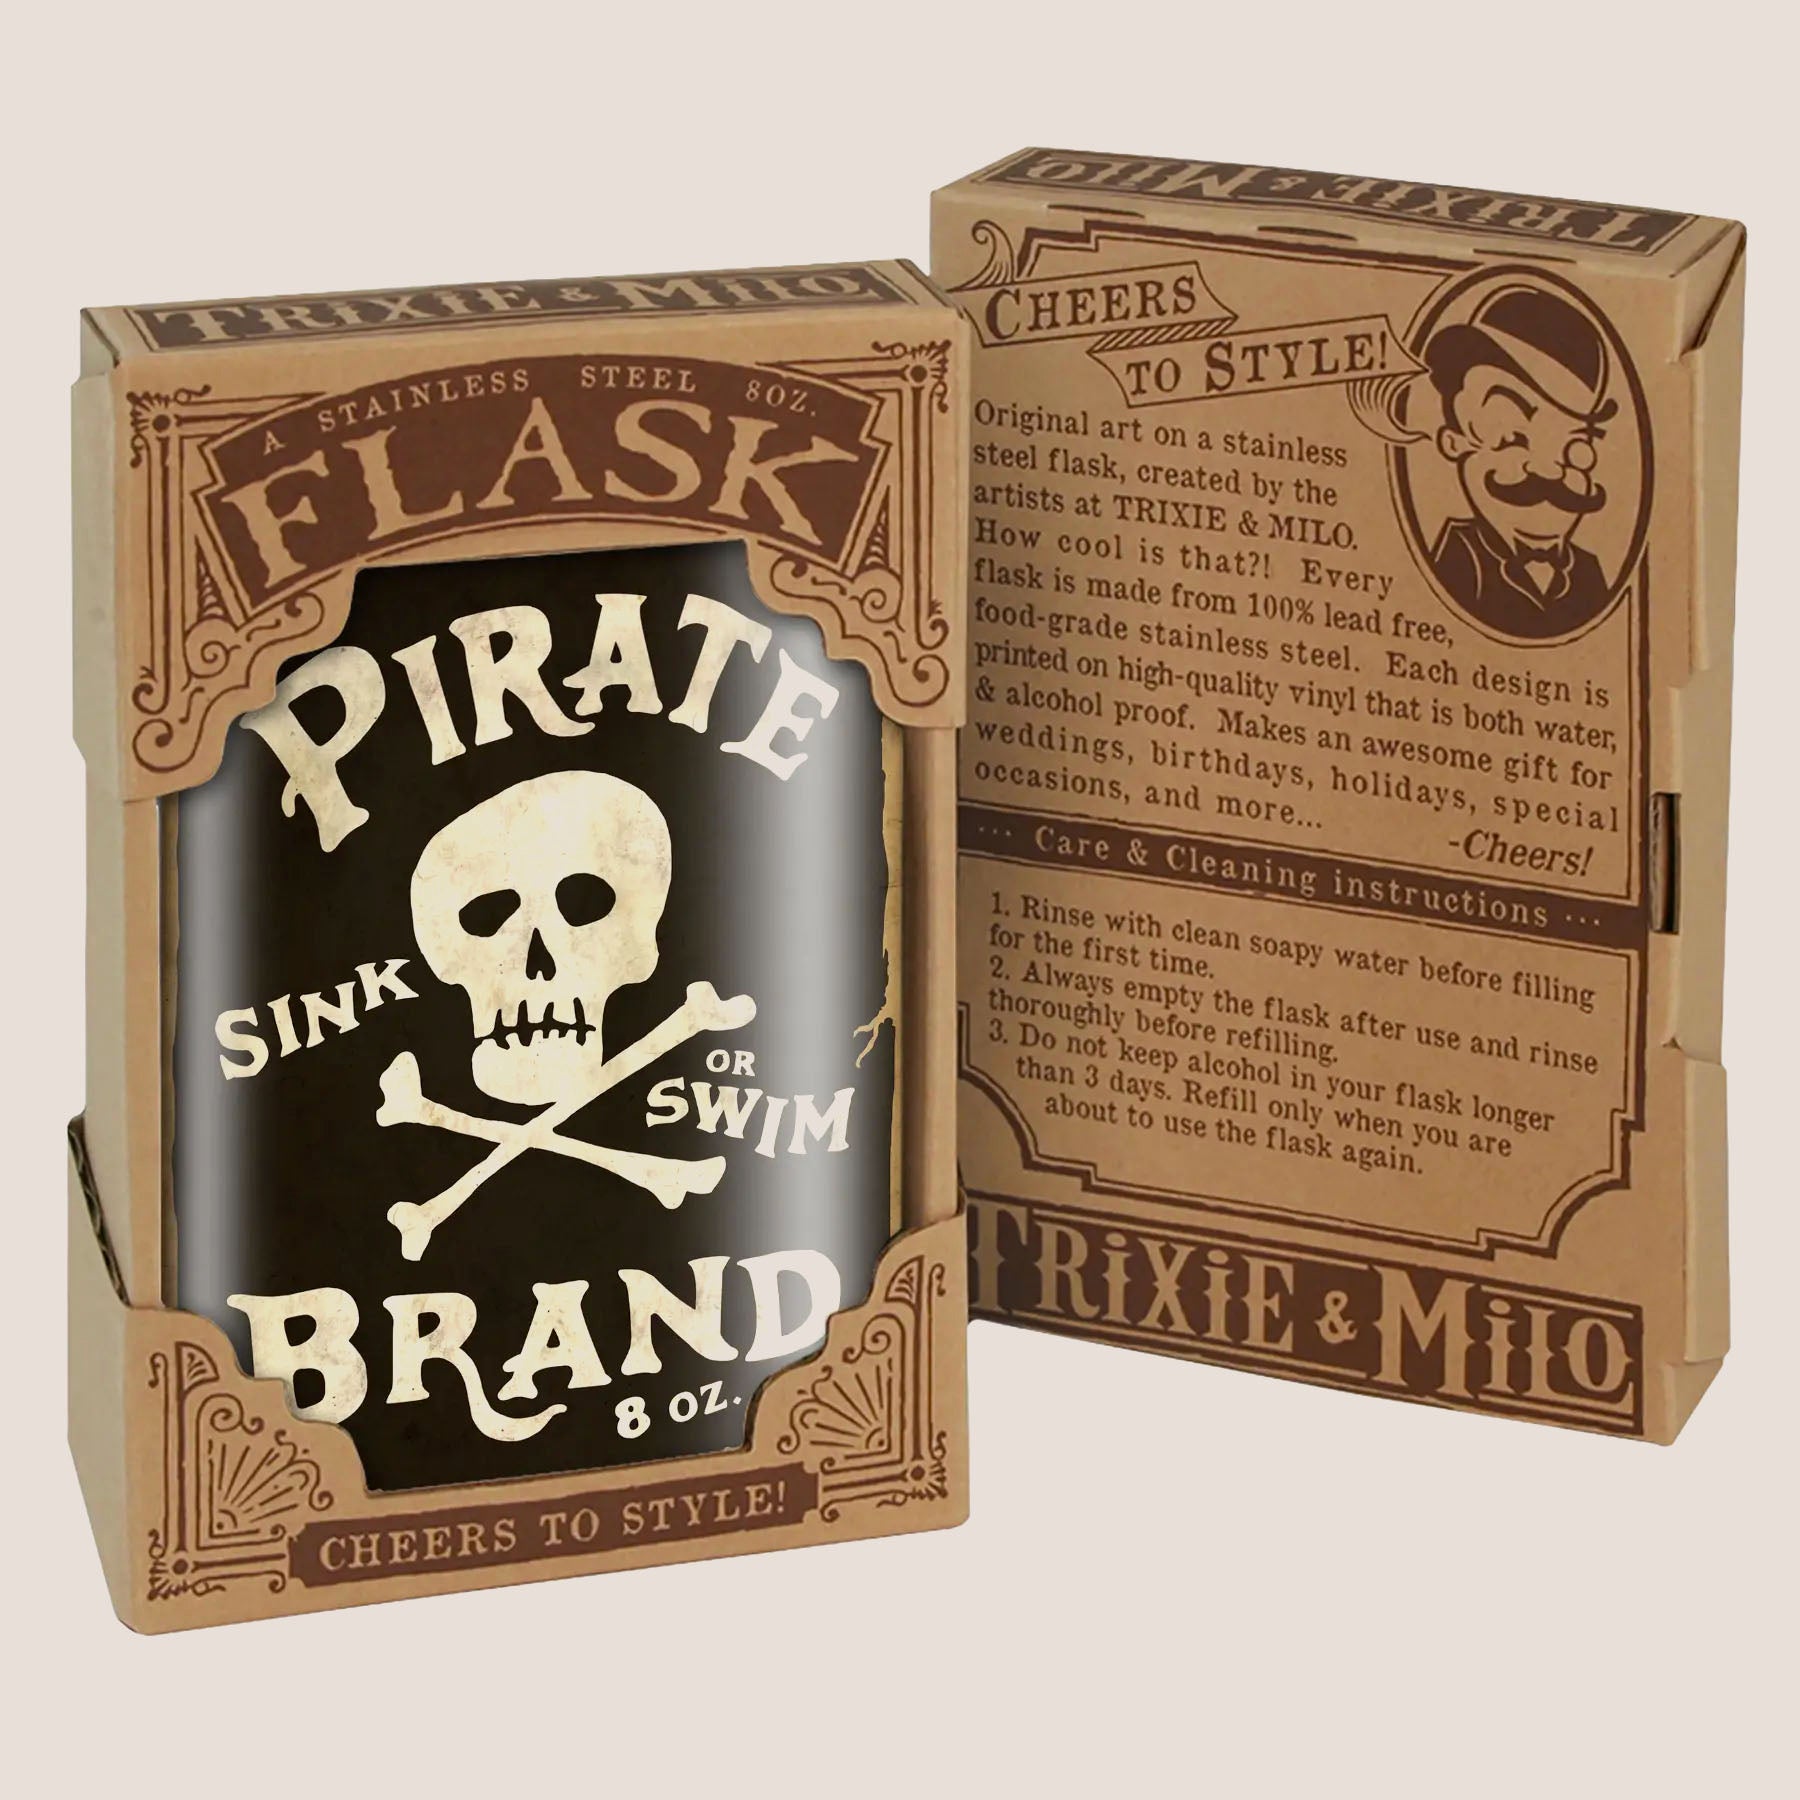 8 oz. Hip Flask: Pirate Brand, Sink or Swim Kick off every holiday or party with confidence. Cool stylish stainless steel drinking flask. Designed for durability and aesthetic appeal in gift box